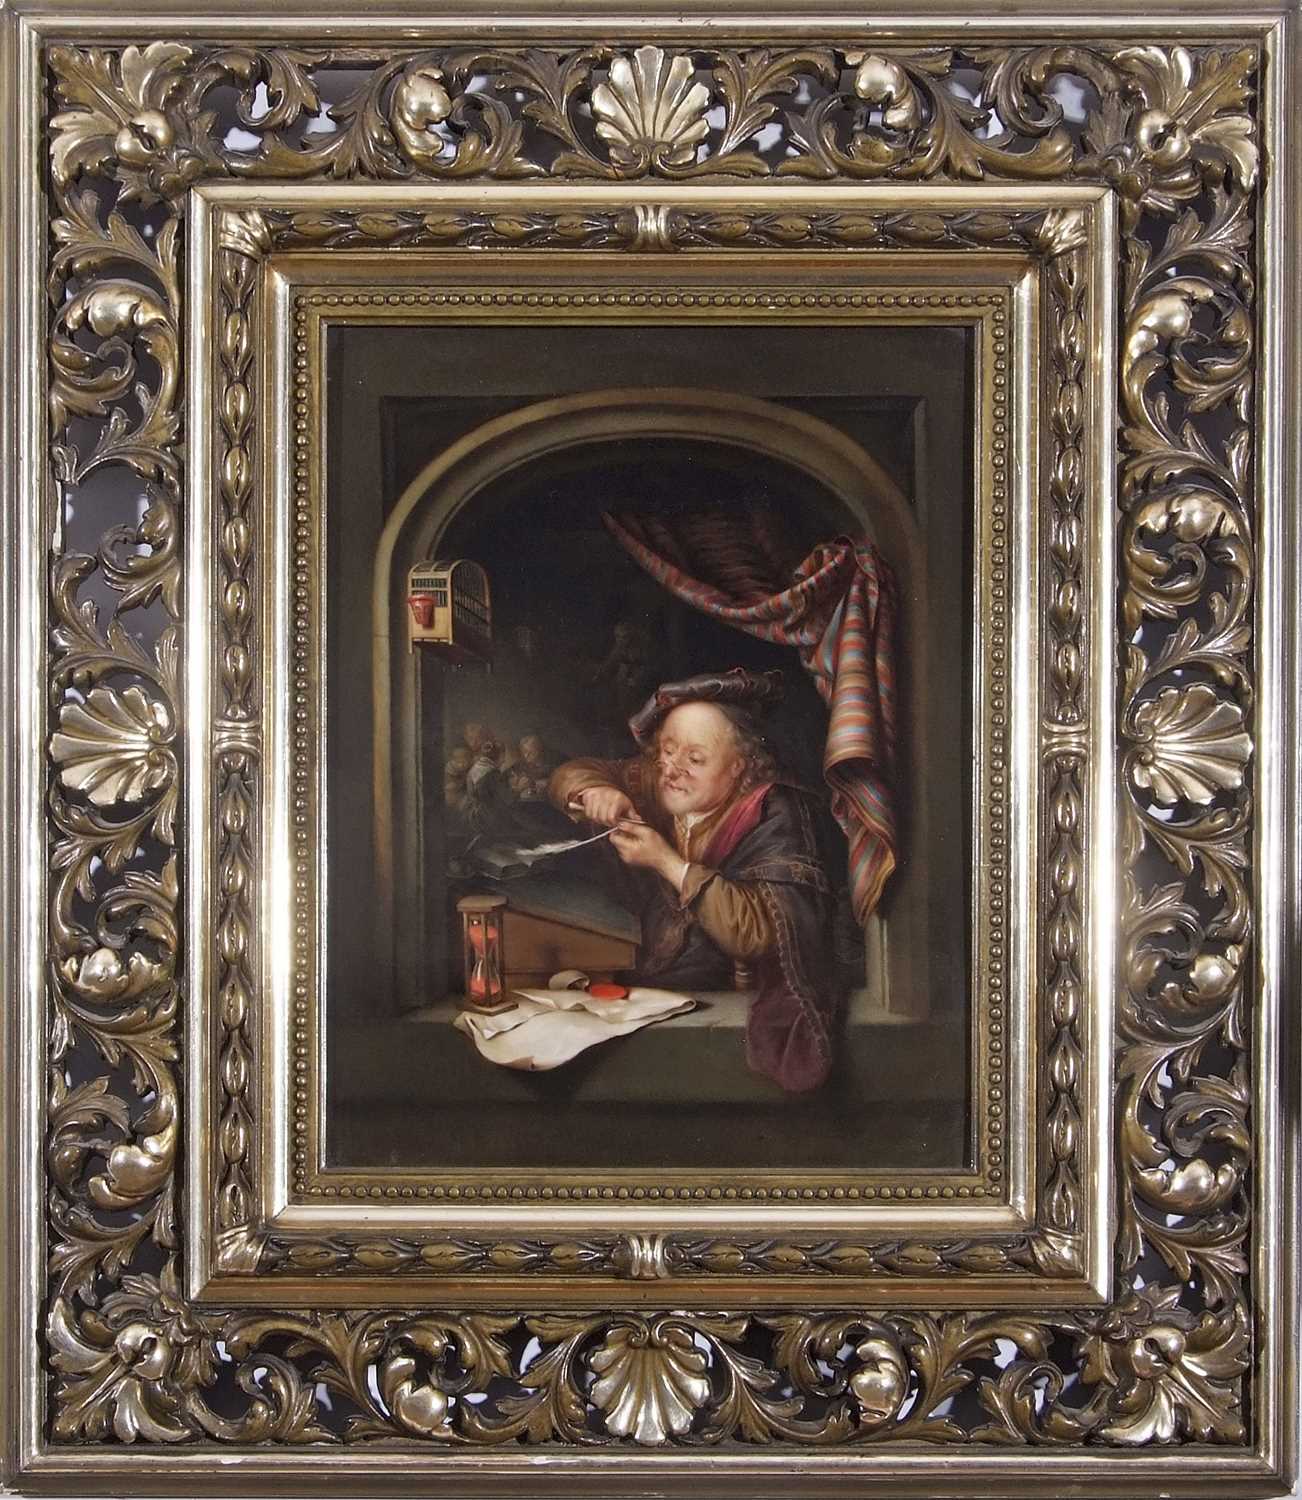 A Meissen porcelain plaque depicting an old schoolmaster sharpening his quill with children in a